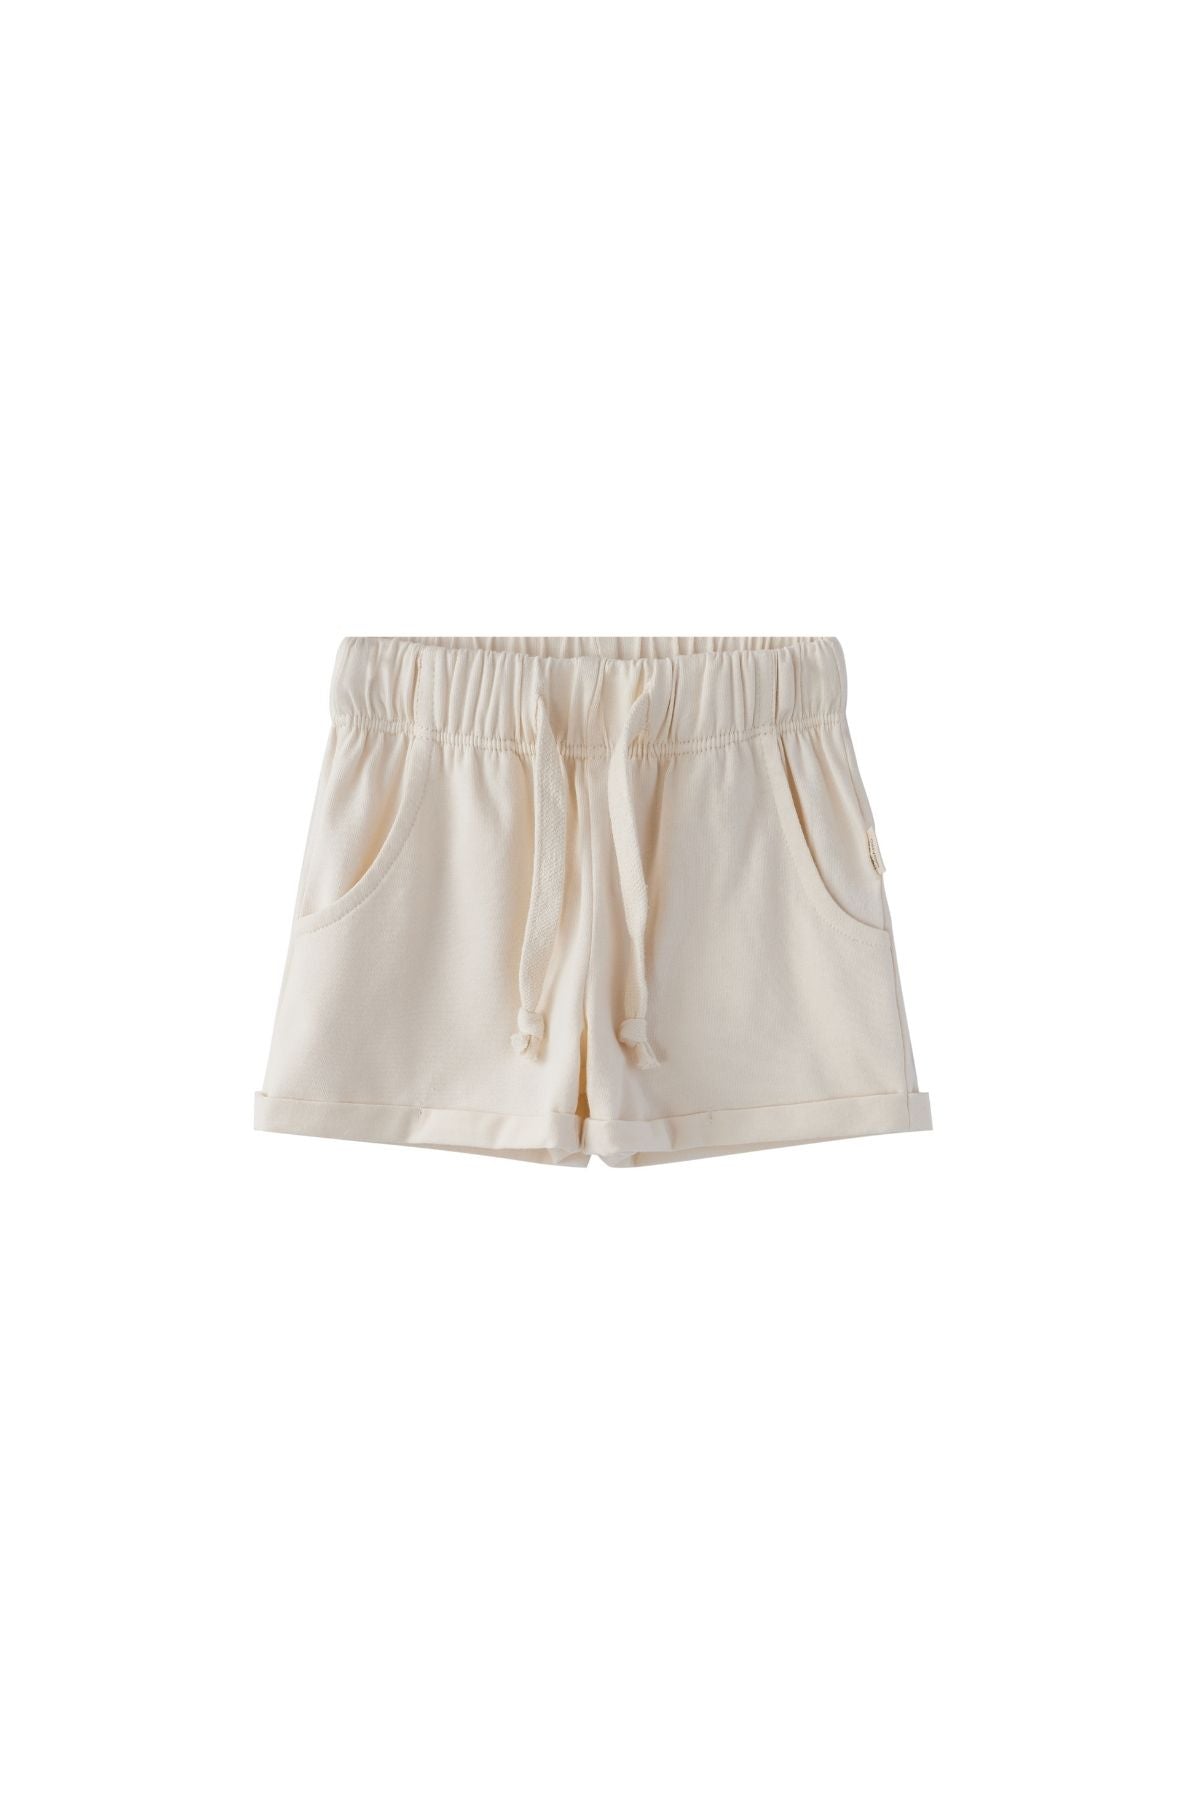 image for Organic Essential Shorts-Antique White